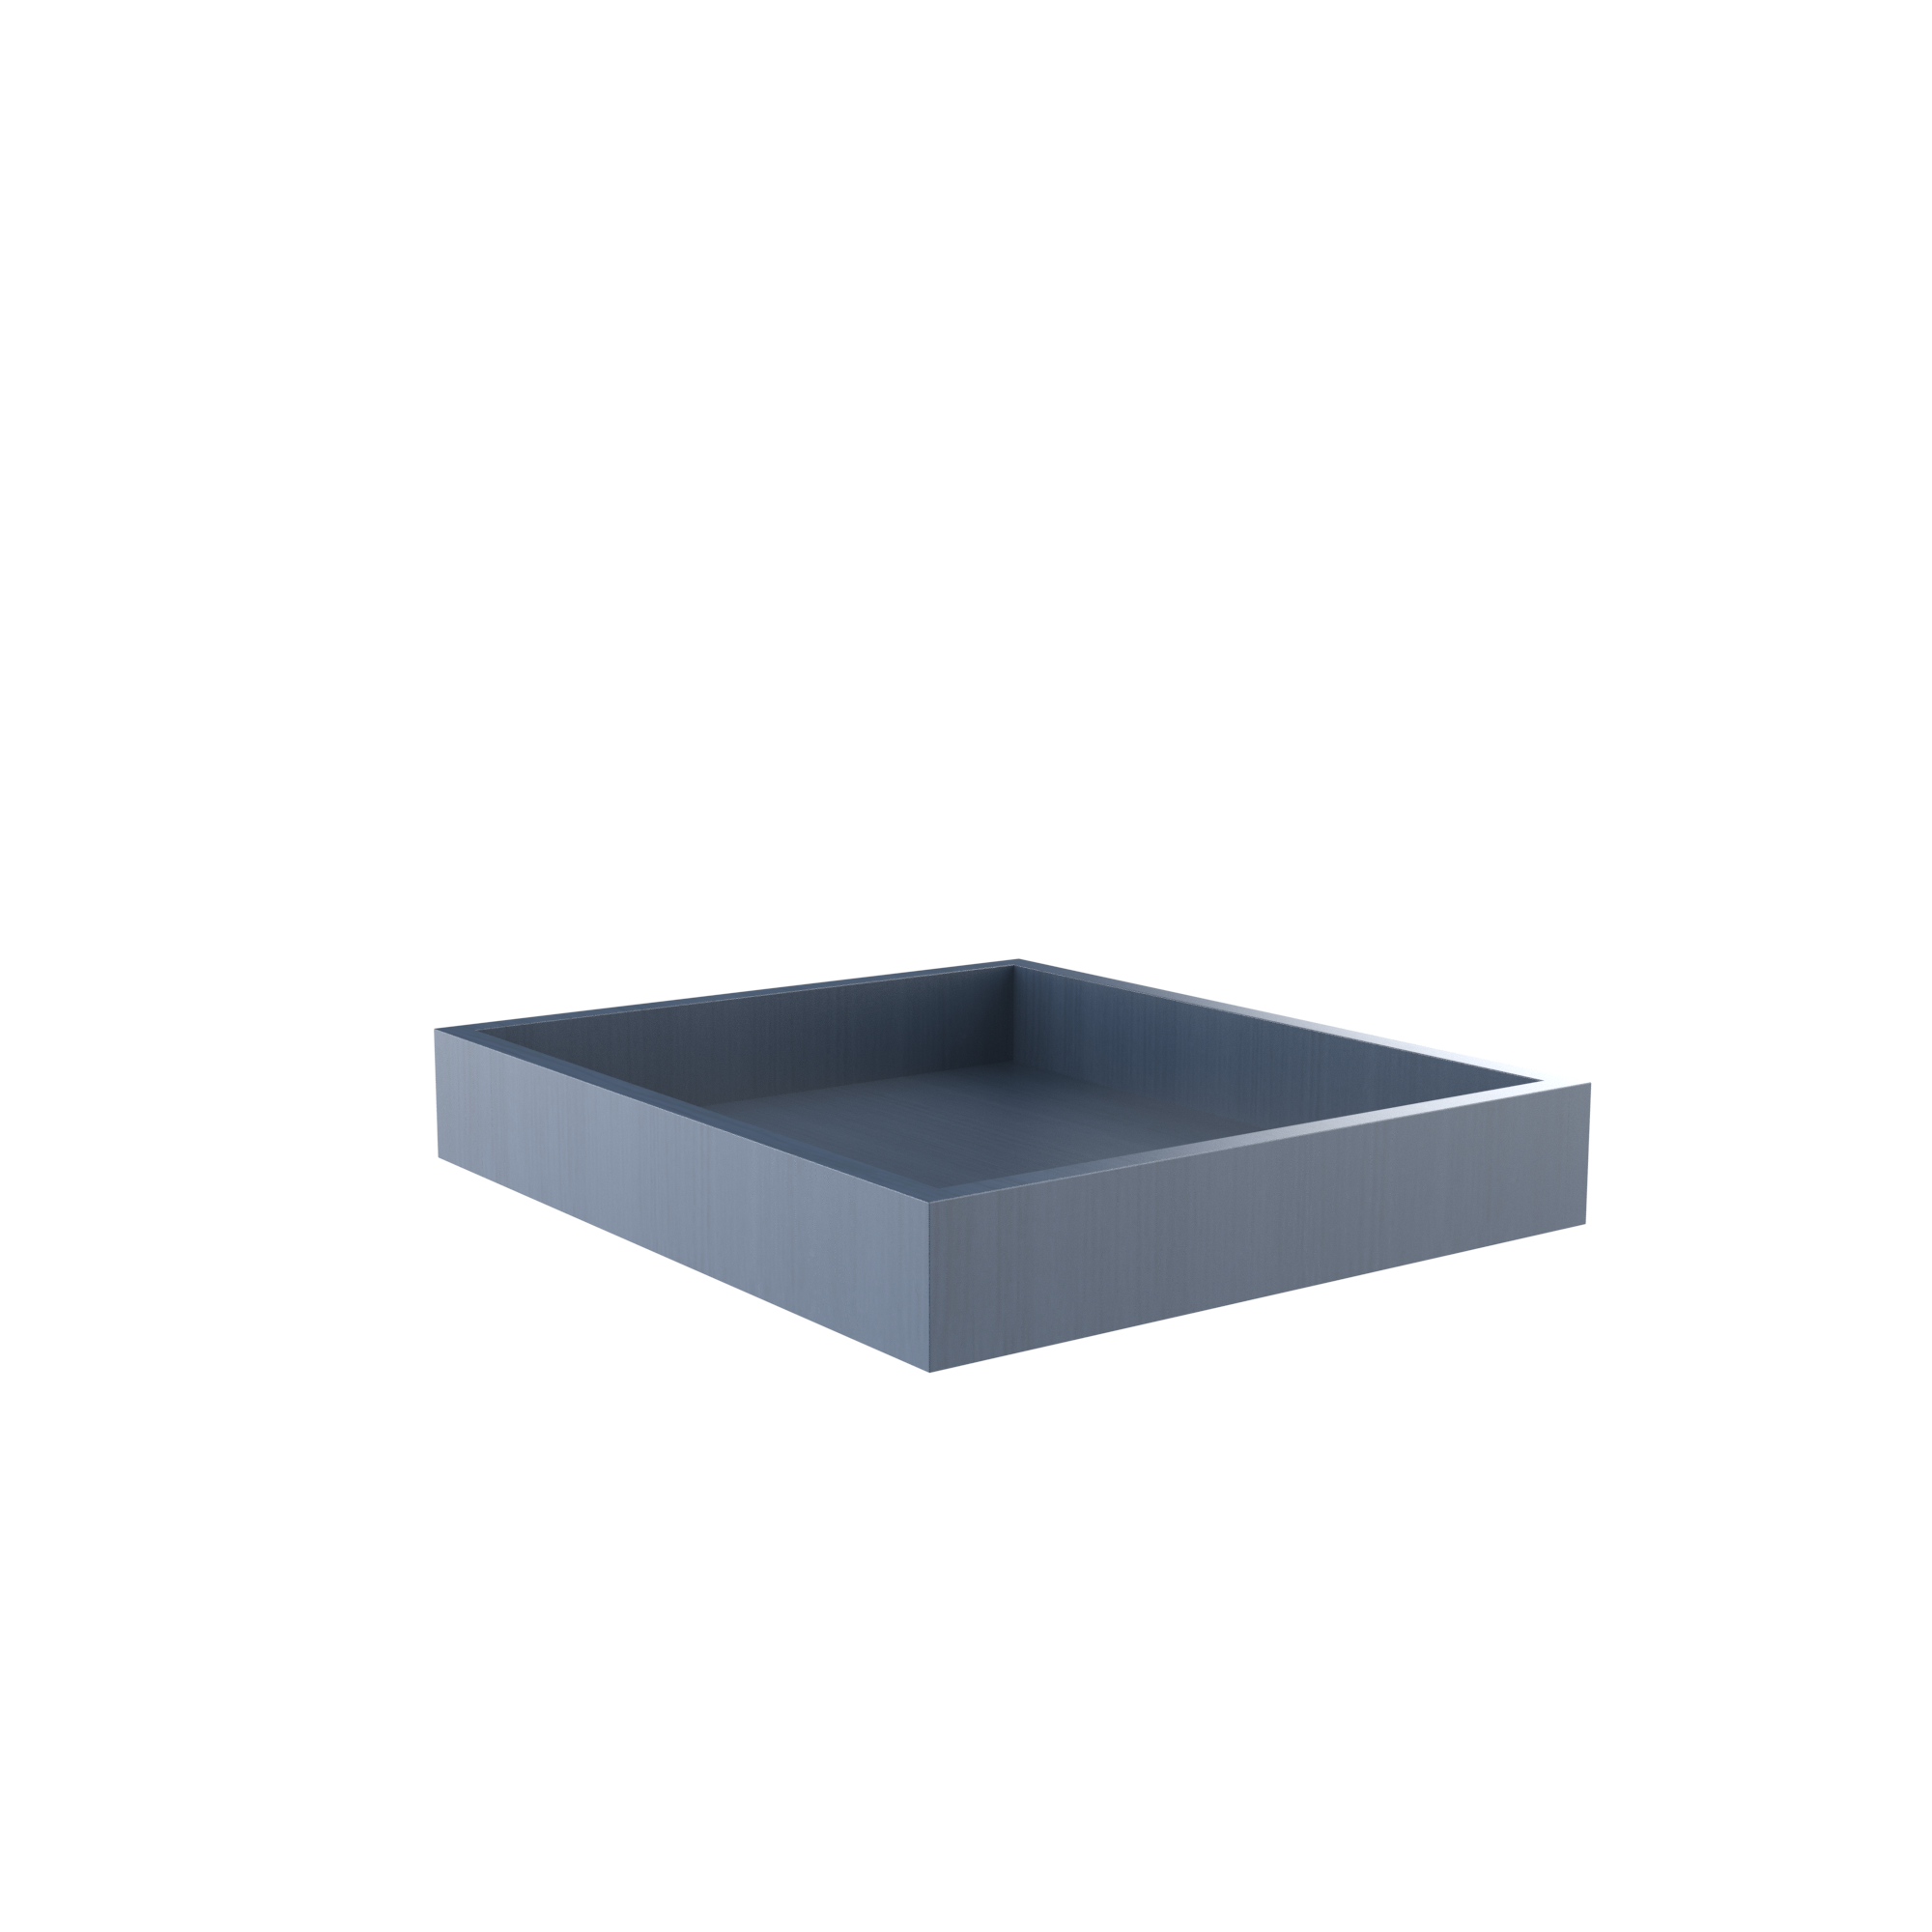 Roll Out Tray for Cabinets - Fits B18 - Blue Shaker Cabinet Cabinet - RTA